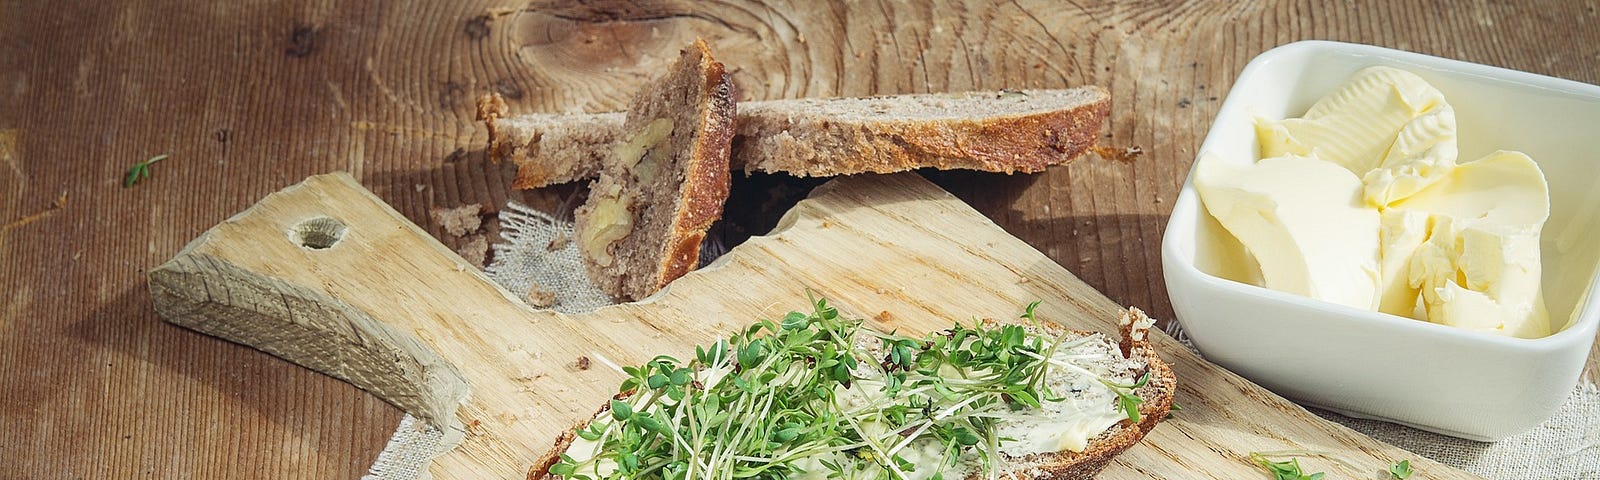 Picture of a kitchen cutting board with two slices of buttered bread generously covered with watercress.